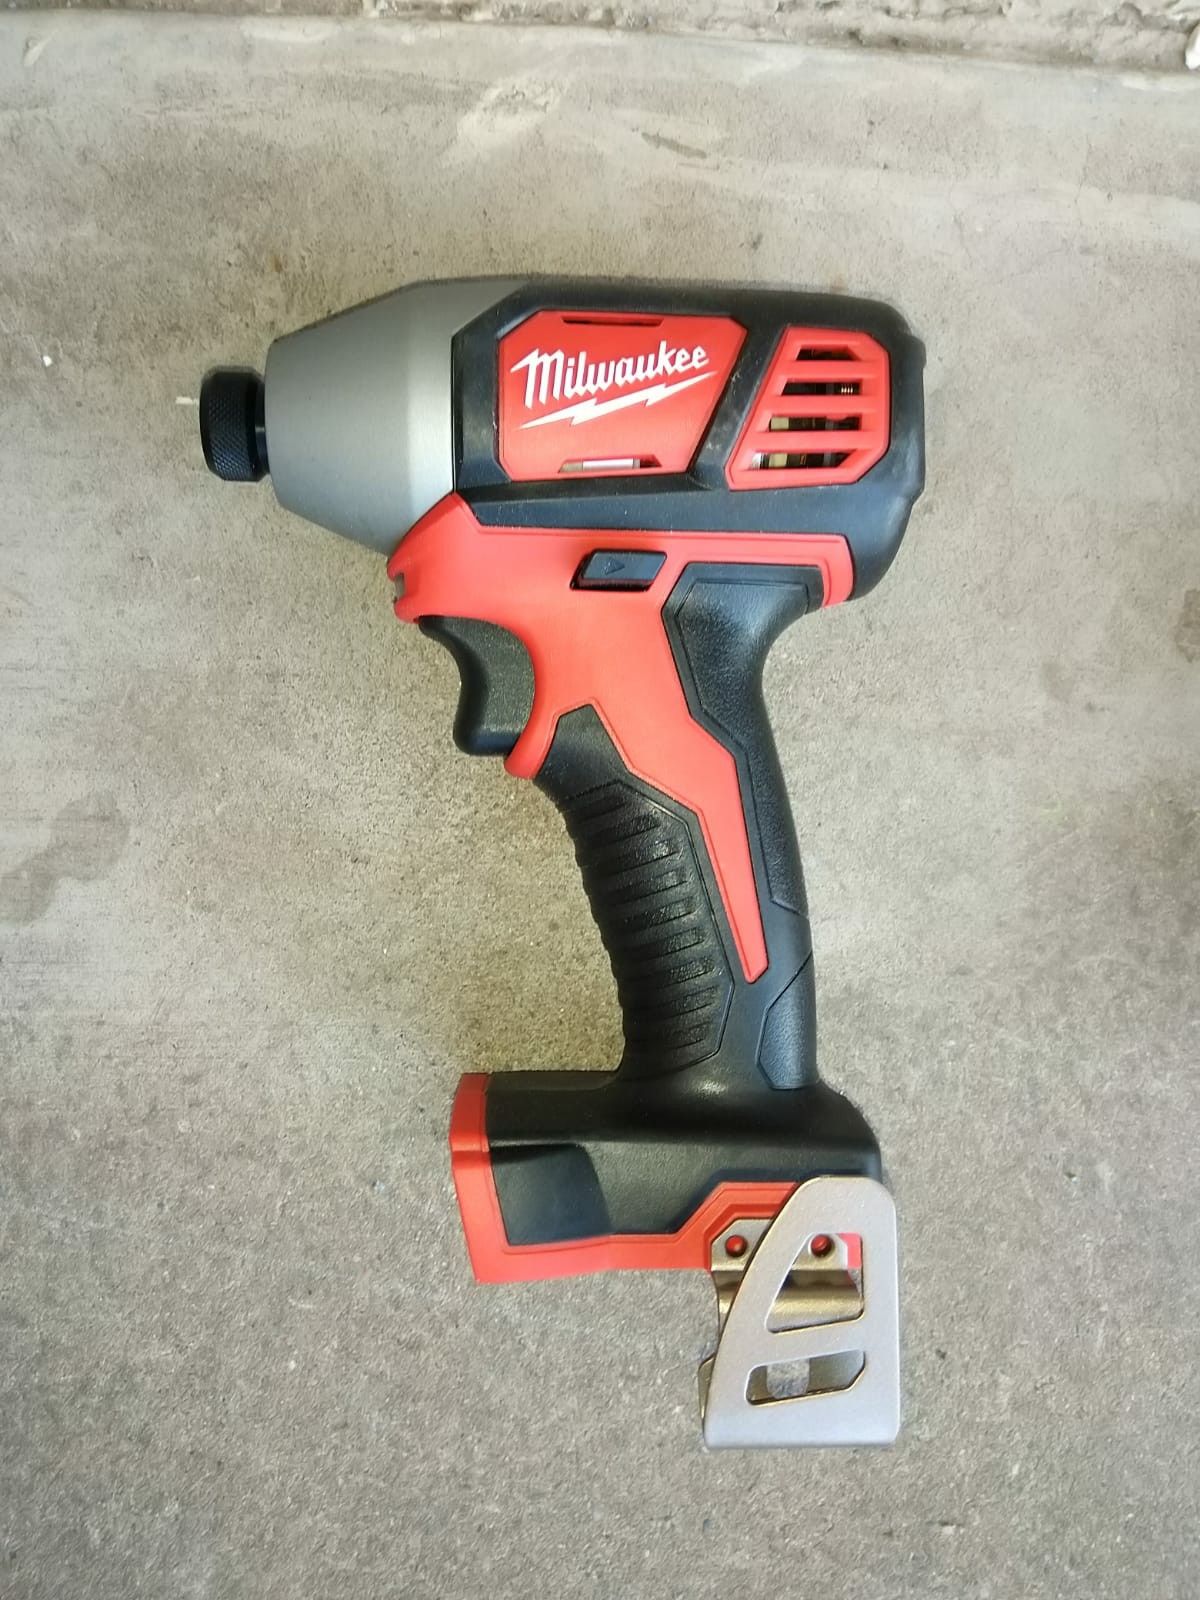 IMPACT DRILL MILWAUKEE BATTERY NOT INCLUDED